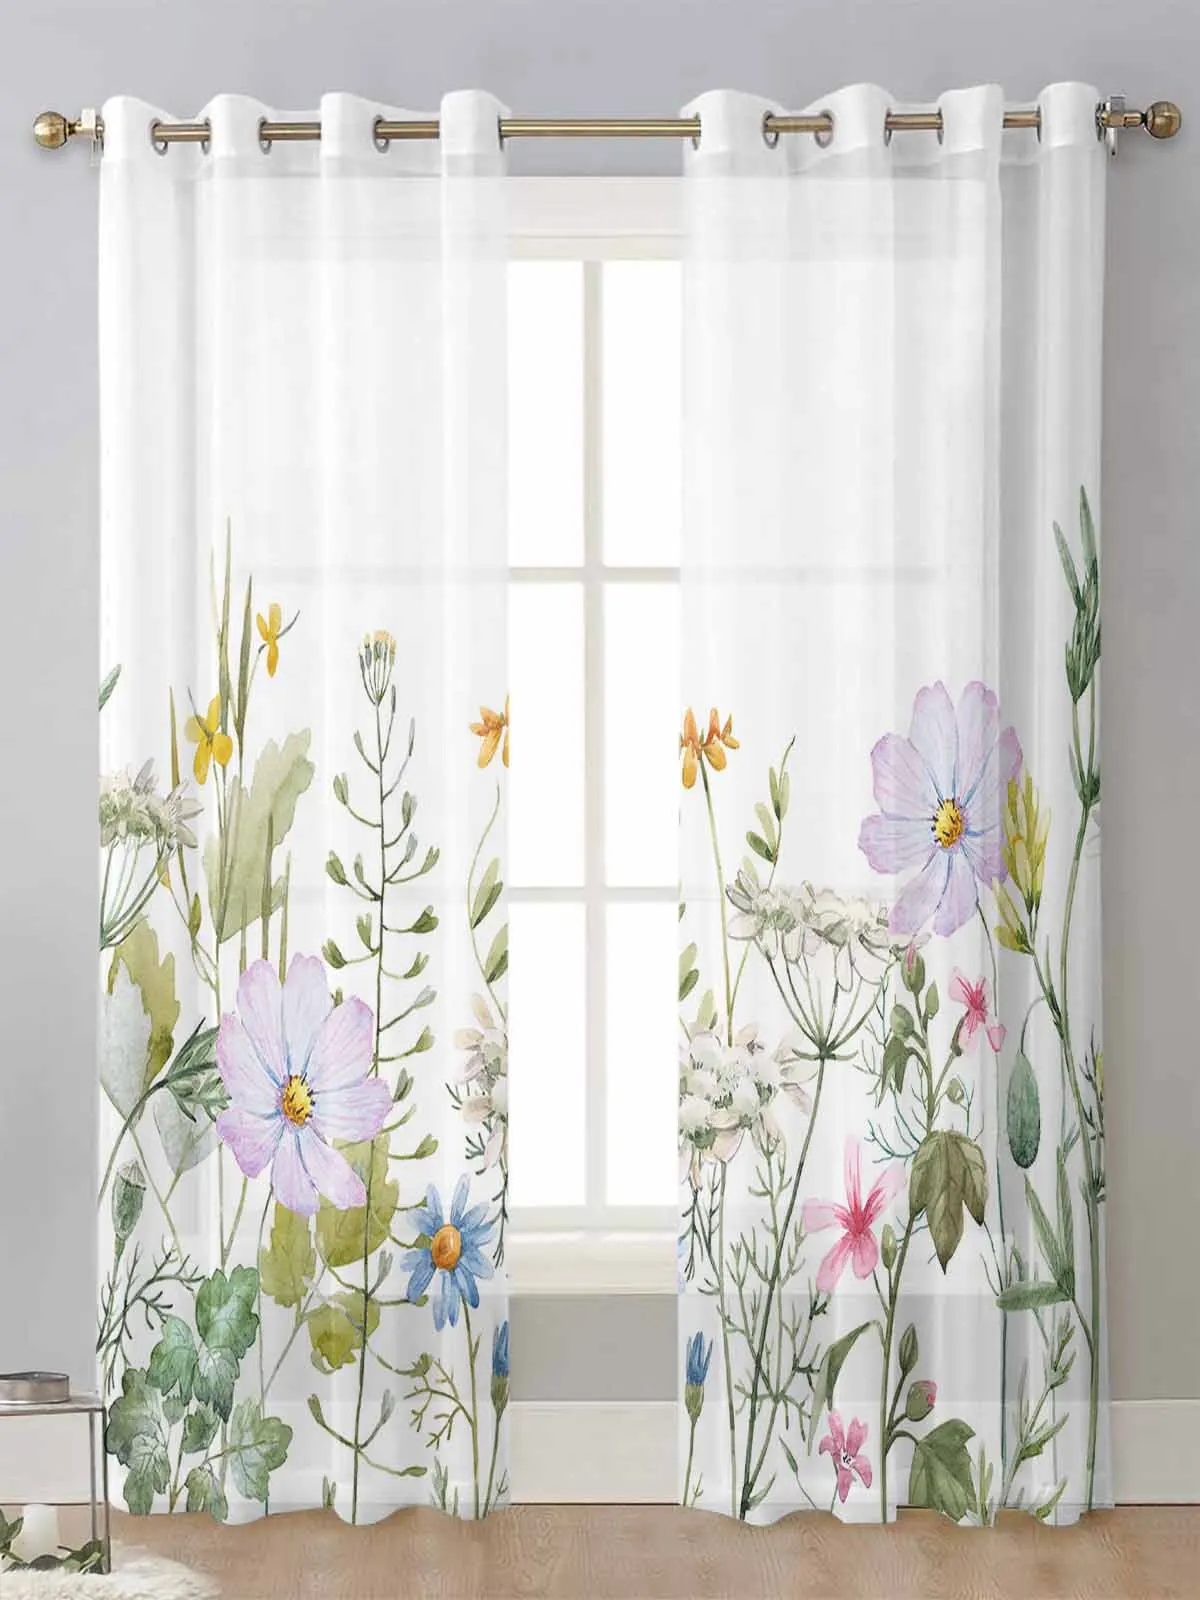 

Spring Flower Vanilla Wildflower Sheer Curtains For Living Room Window Voile Tulle Curtain Cortinas Drapes Home Decor